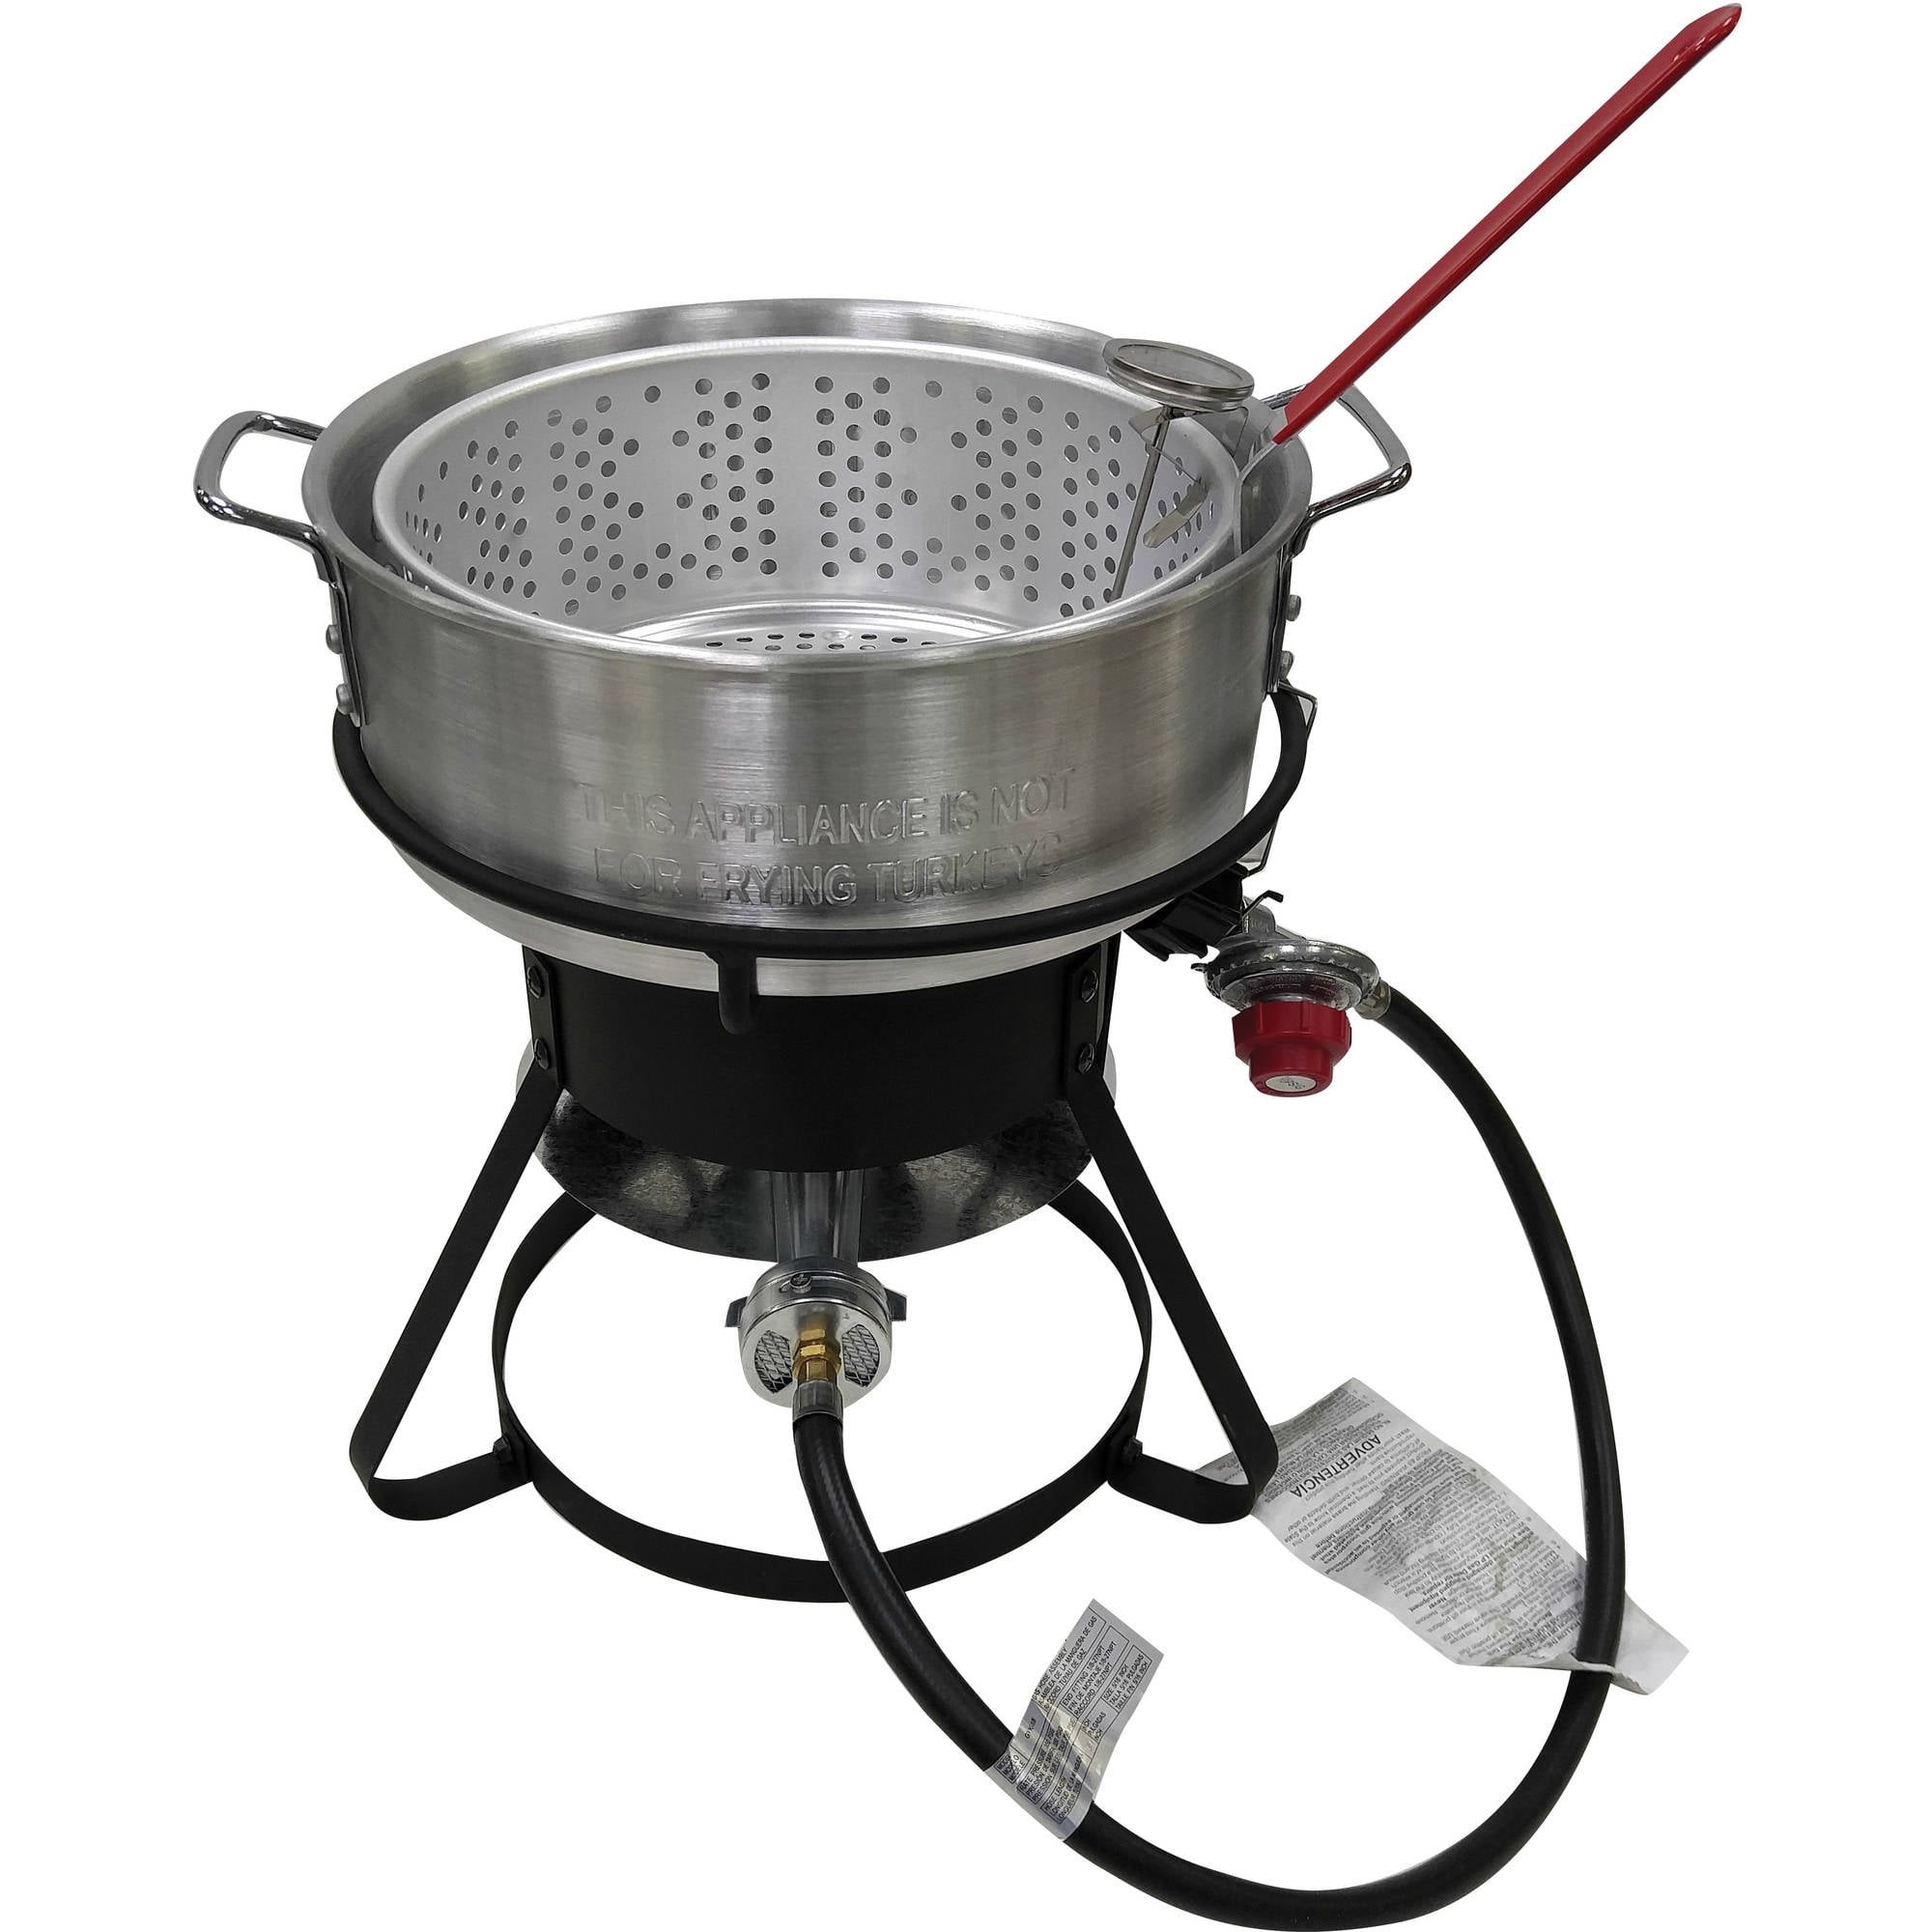 OuterMust 11 Qt. Fish Fryer Pot and Basket, 58,000 BTU Aluminum Propane  Outdoor Deep Fryer Pot with Basket and 5 Inches Thermometer for Frying  Fish